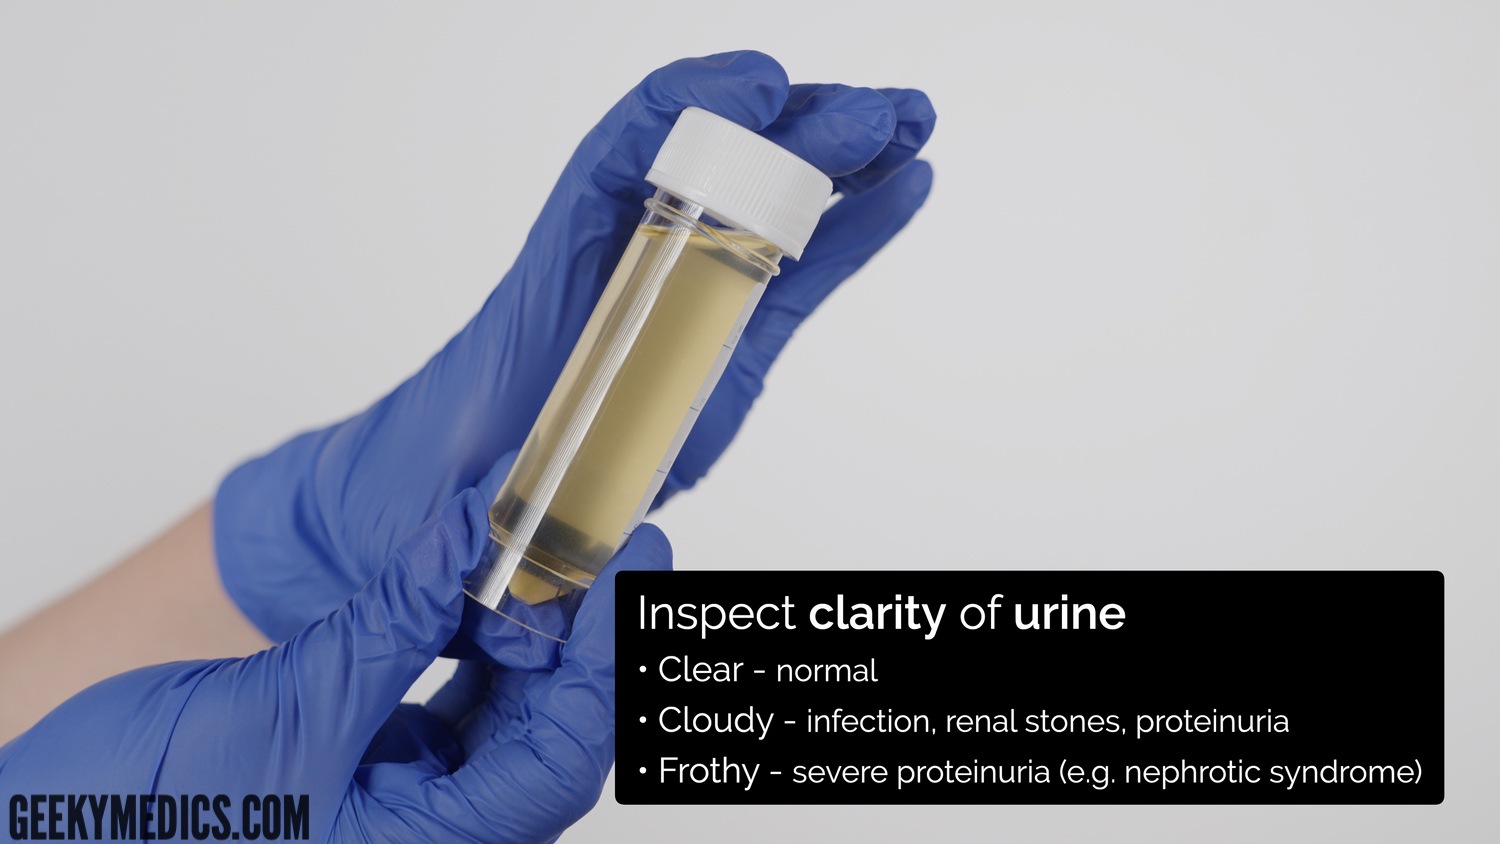 Urinalysis - inspect the clarity of the urine